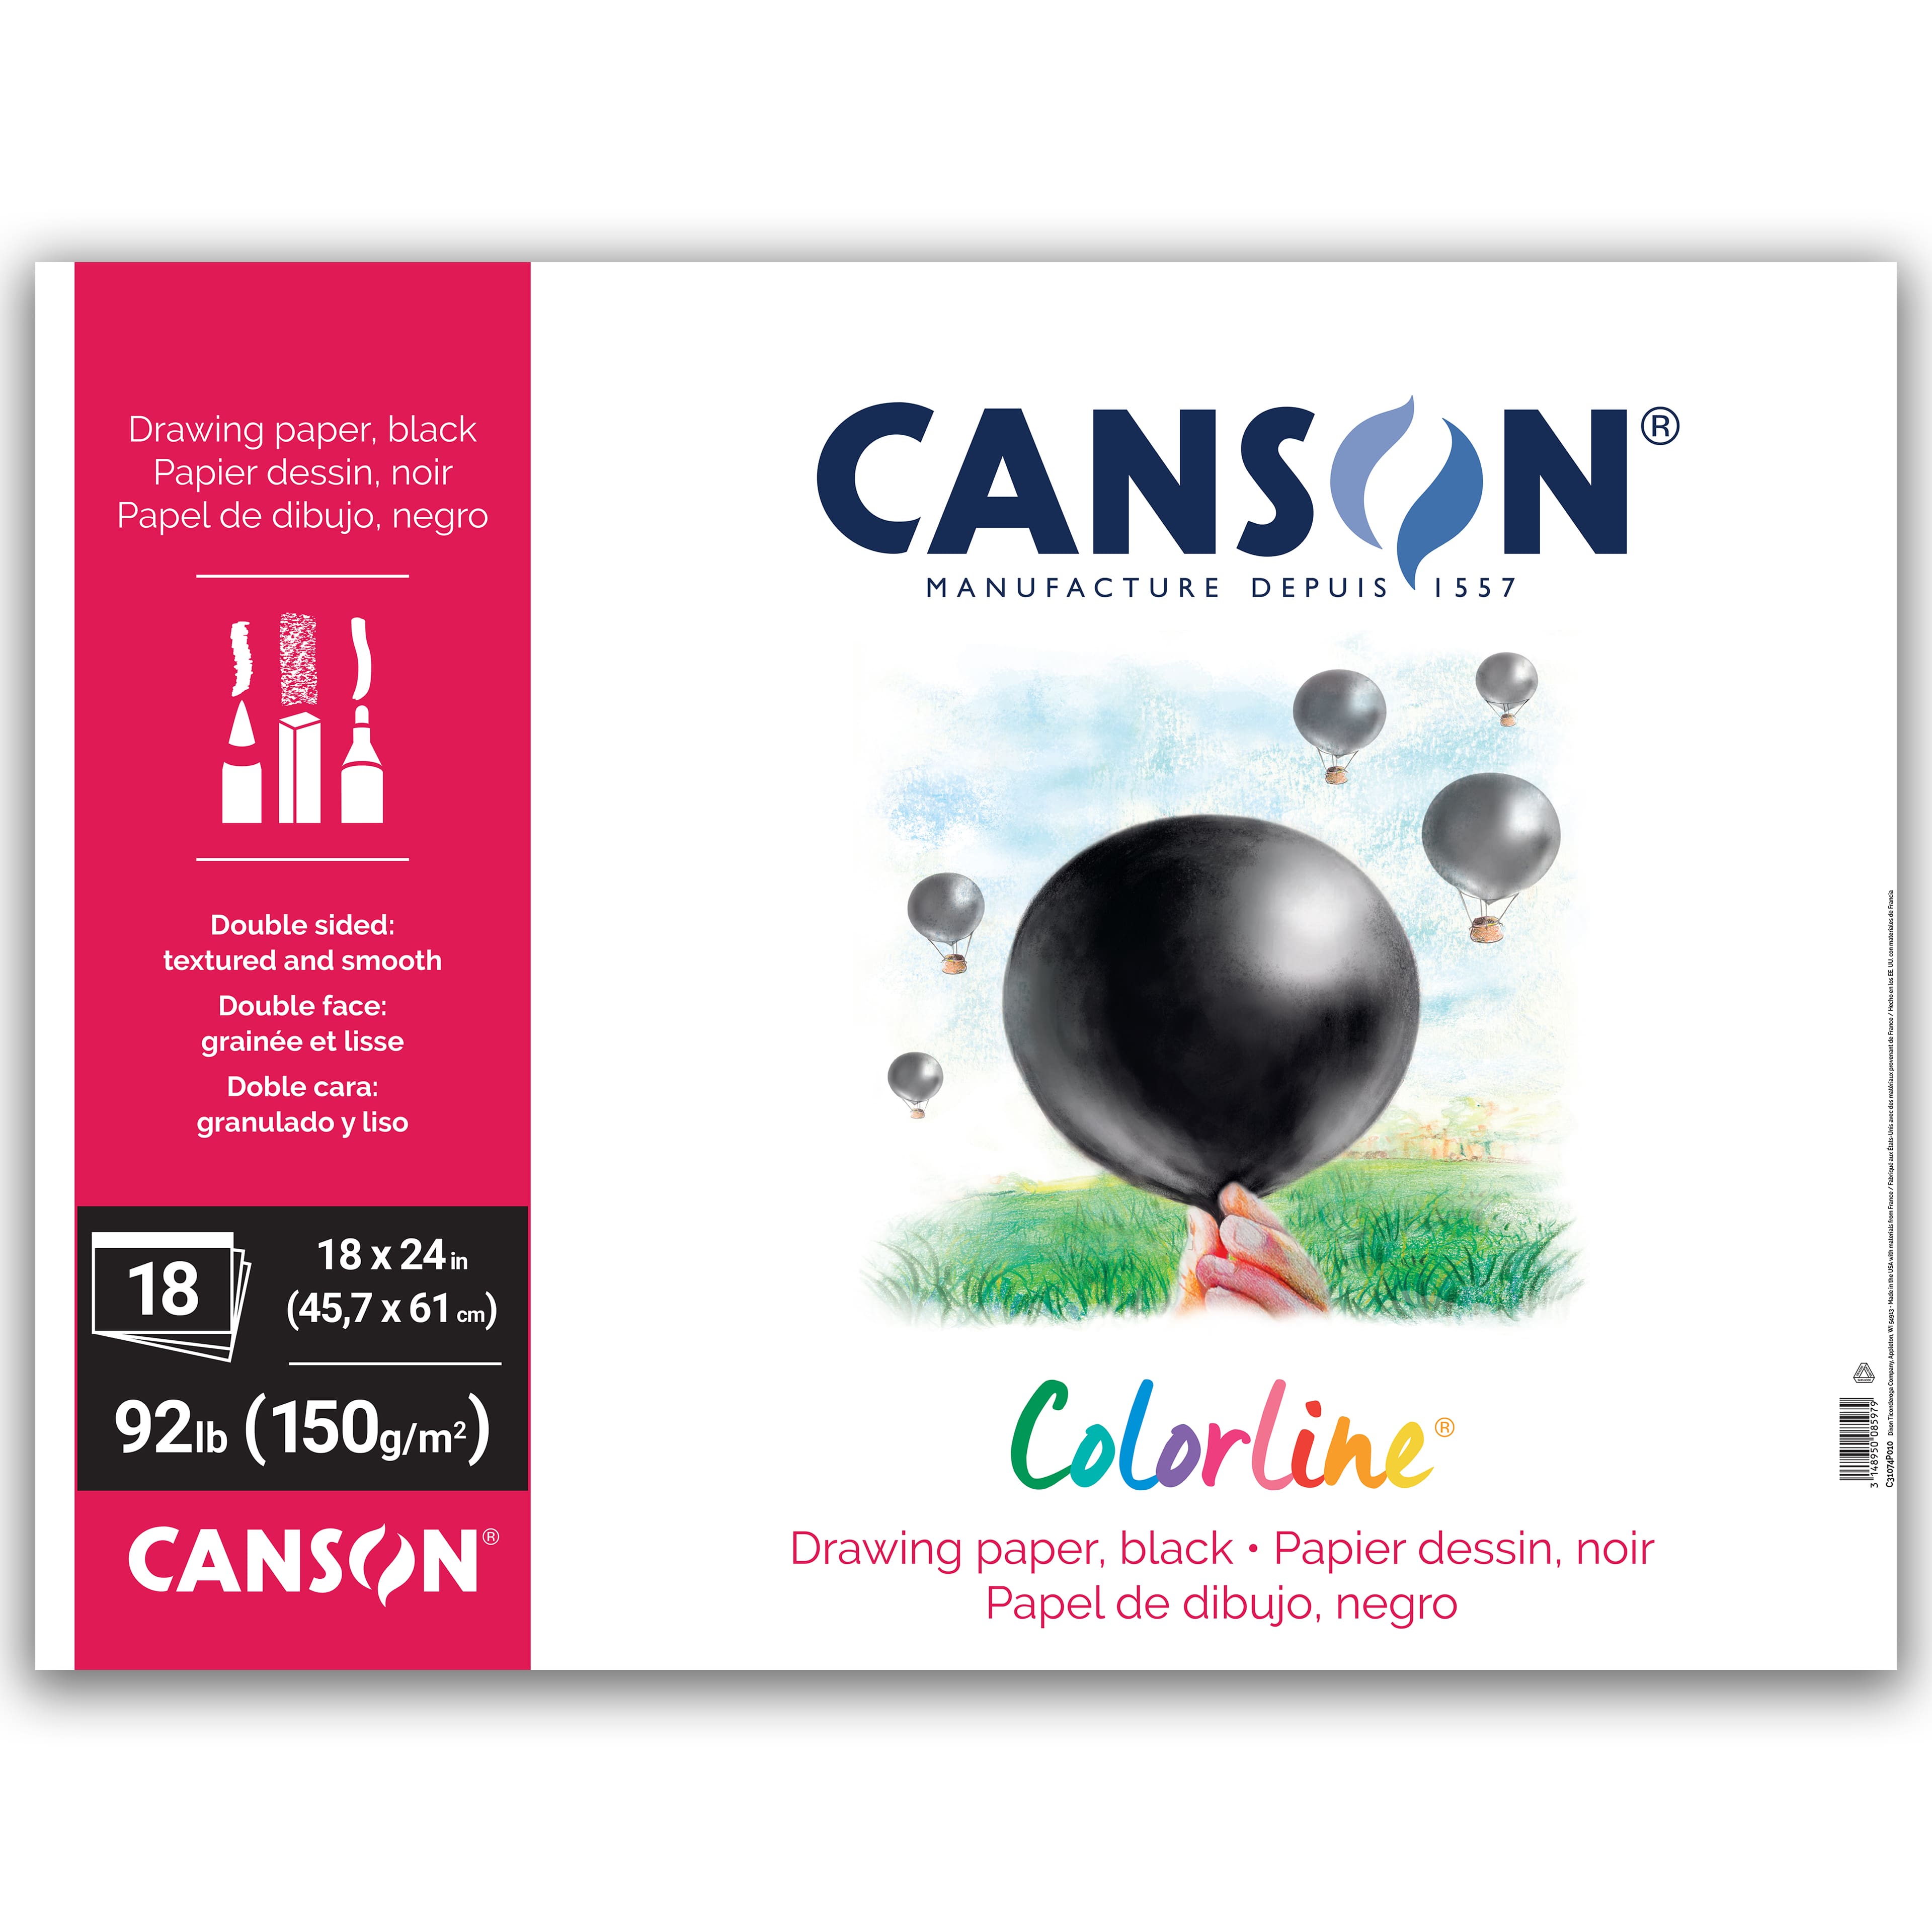 Canson Colorline Art Papers